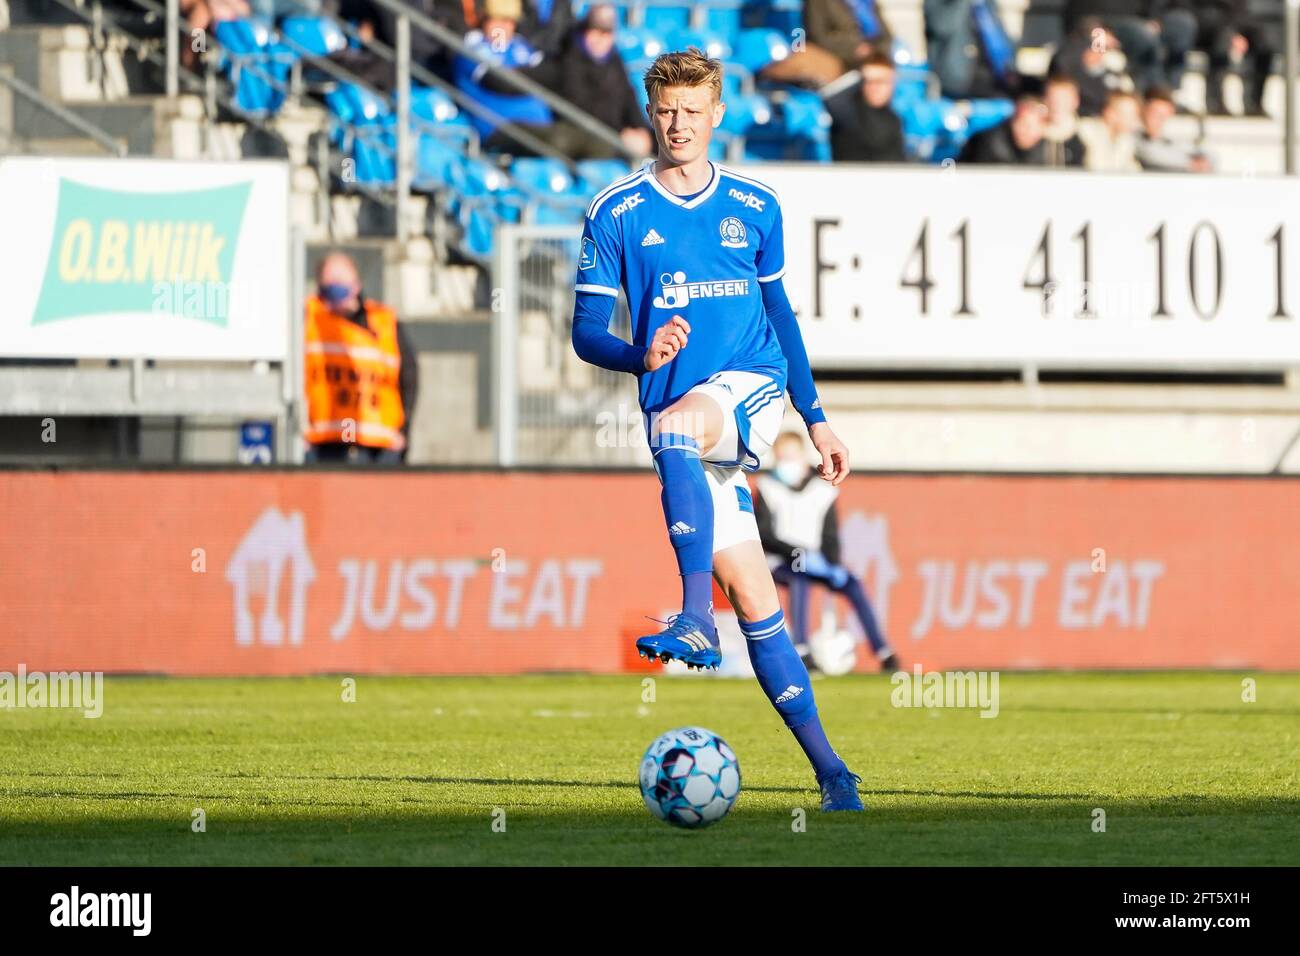 Lyngby, Denmark. 20th May, 2021. Frederik Winther (6) of Lyngby Boldklub seen during the 3F Superliga match between Lyngby Boldklub and Odense Boldklub at Lyngby Stadium. (Photo Credit: Gonzales Photo/Alamy Live News Stock Photo